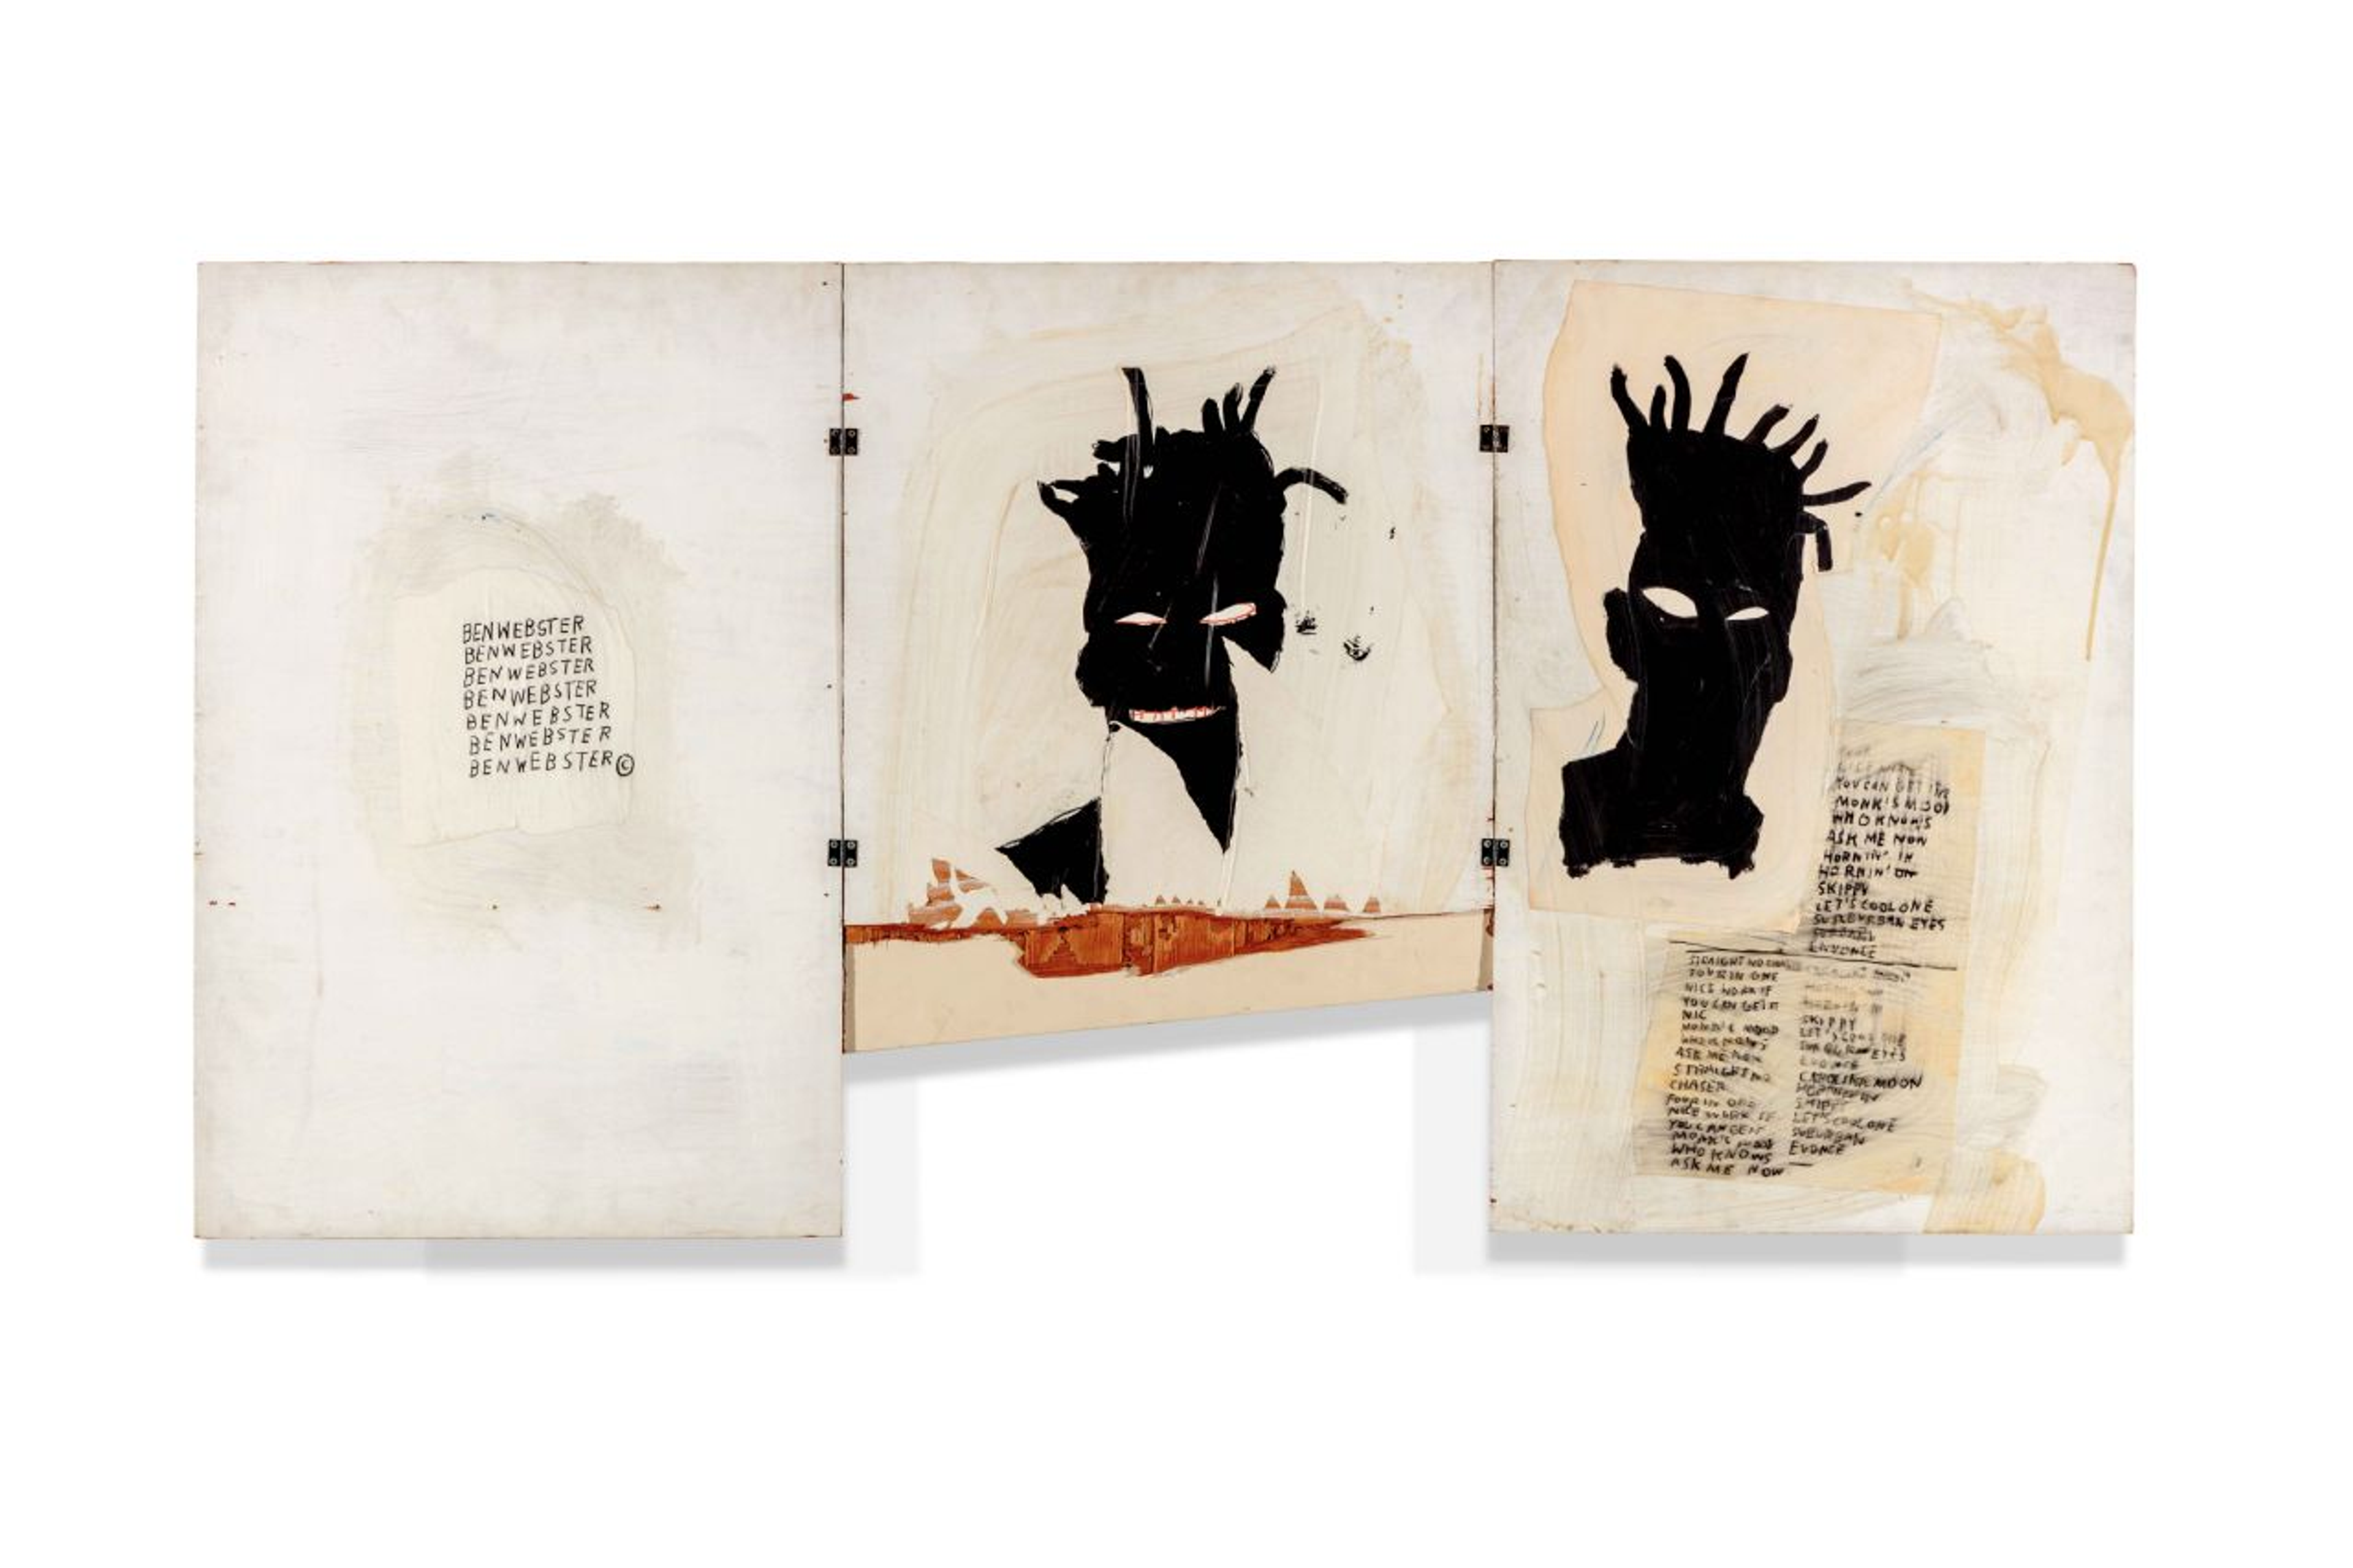 This triptych by Basquiat shows two self portraits, his face largely depicted in solid black except for eyes and a slightly parted mouth. To the left, the name Ben Webster is written repeatedly.